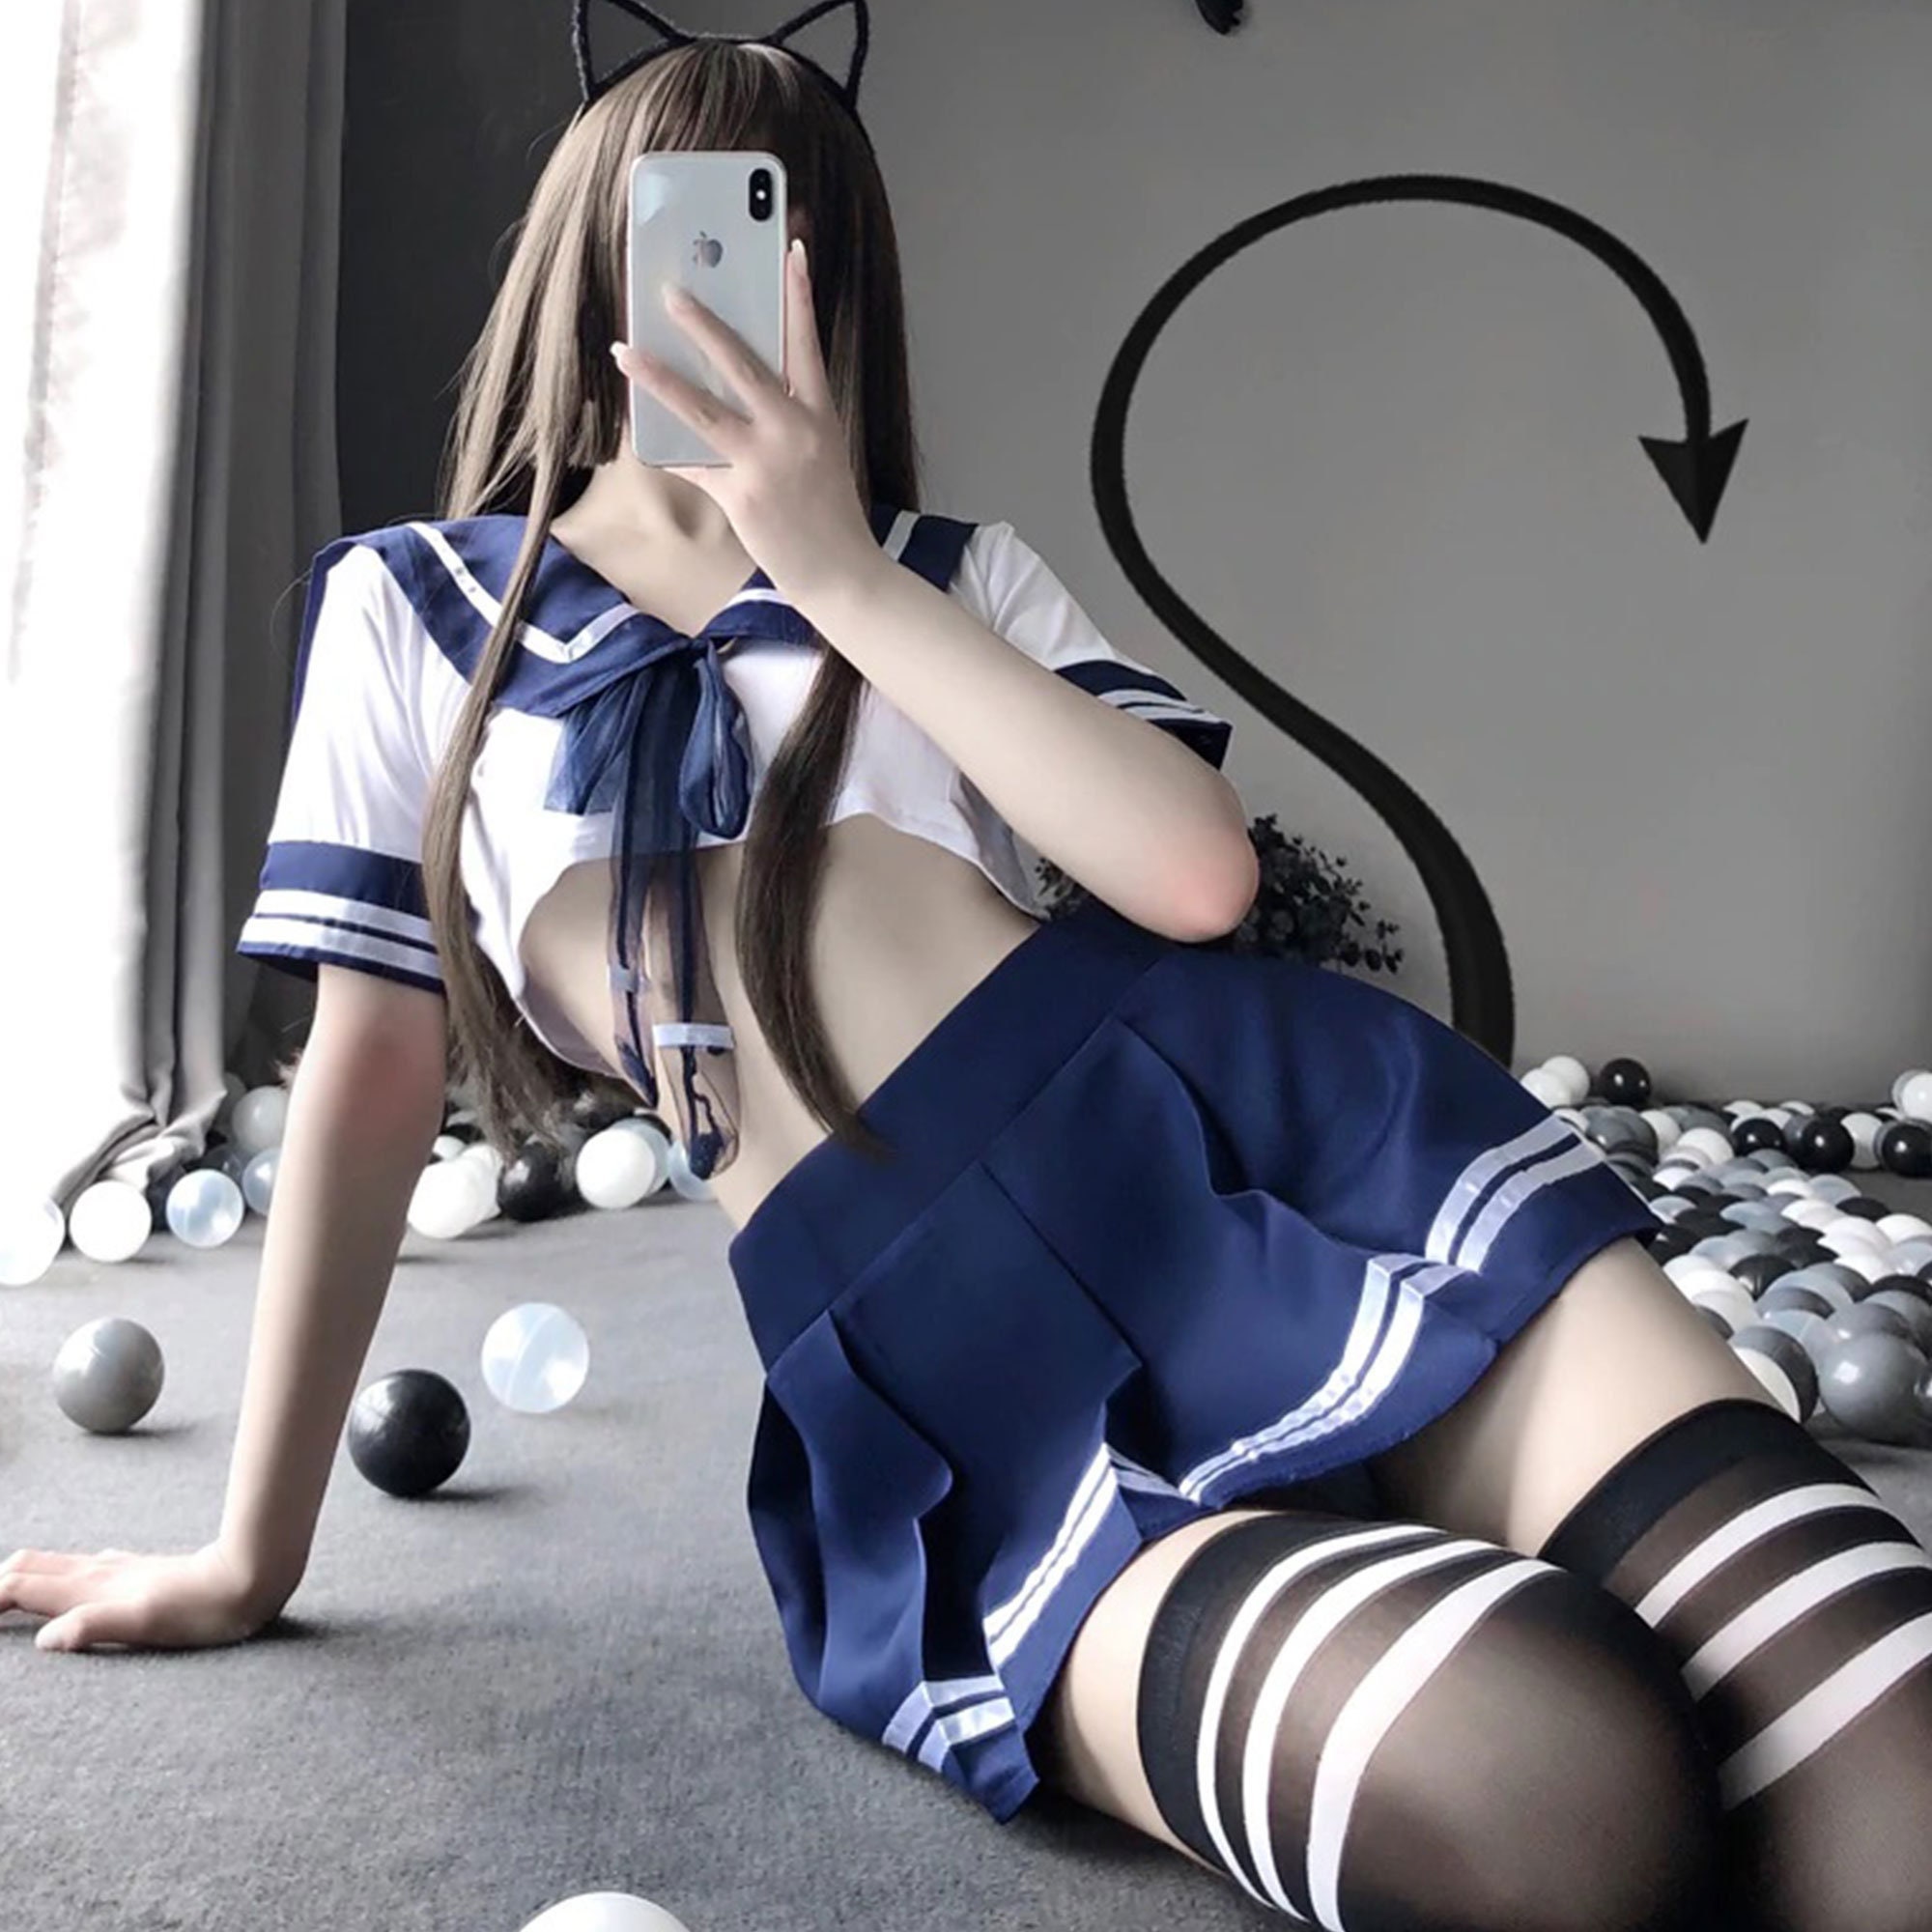 Japanese Sailor Girls Nude - Blue and White Super Sexy Japanese Korean School Girl Outfit - Etsy